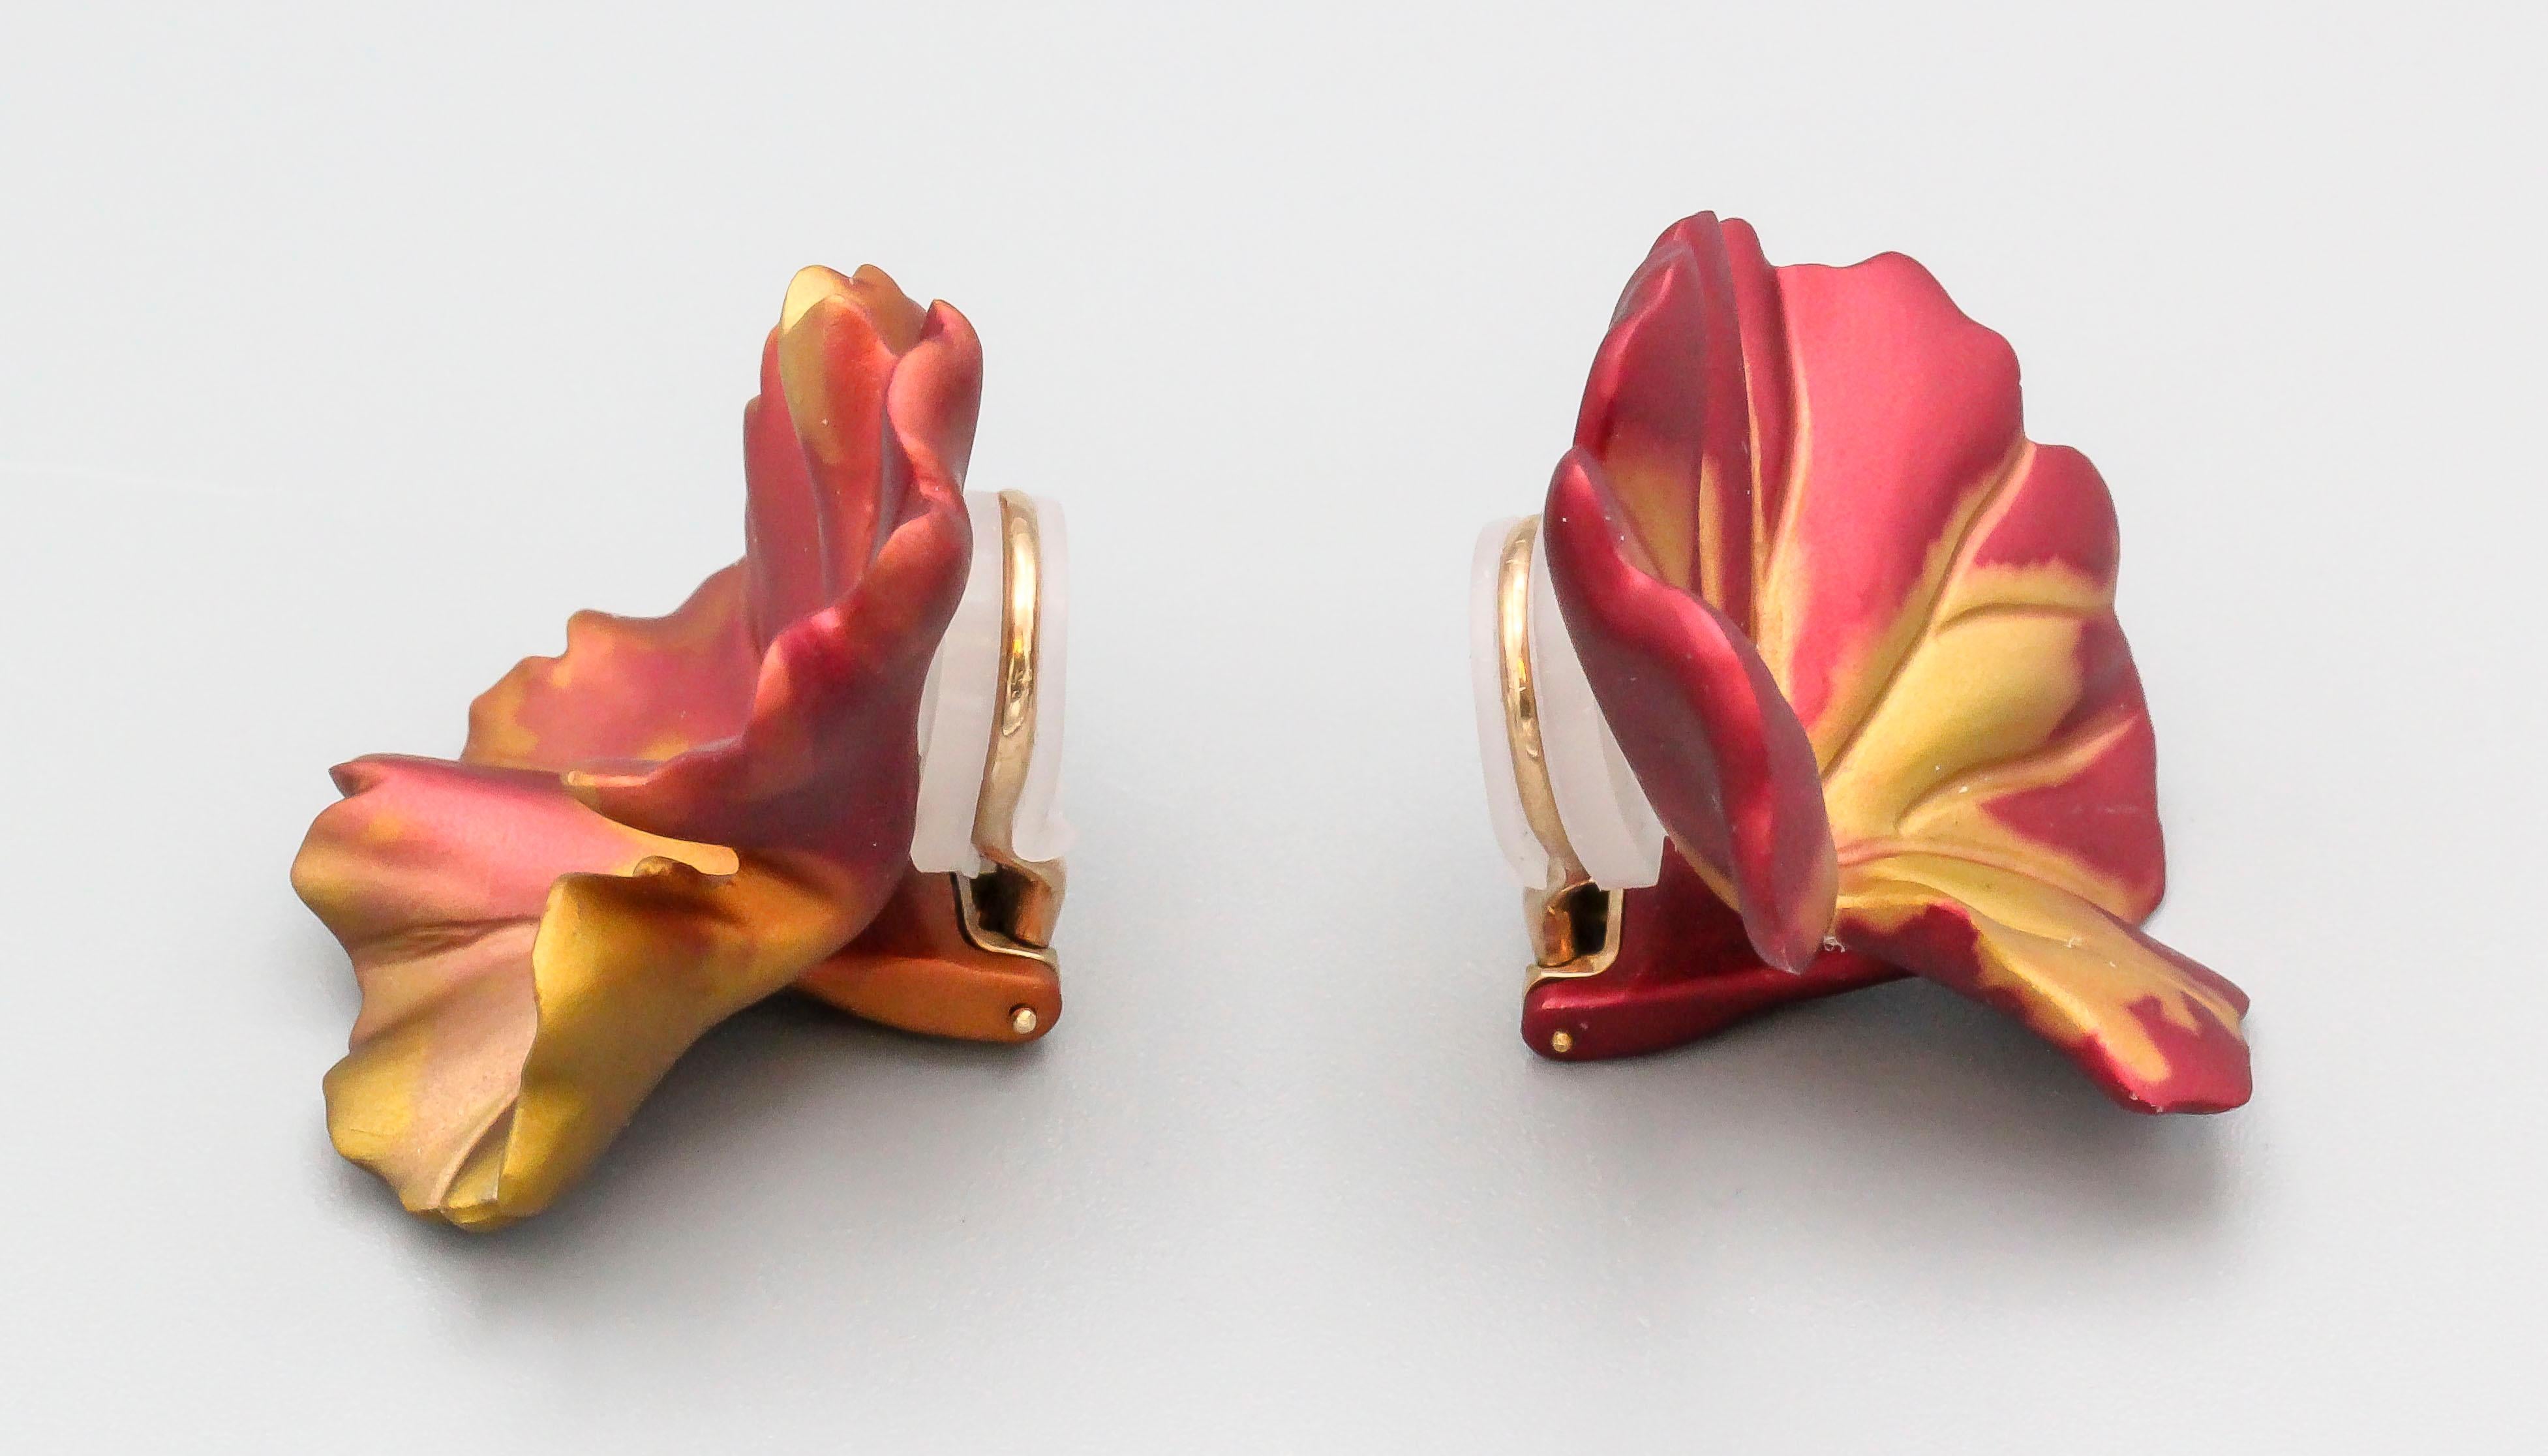 Very fine and scarce aluminum geranium earrings by JAR, Joel Arthur Rosenthal. Beautifully designed to remind one of the changing colors of foliage in the fall.  These are the smaller model and are made in limited edition. Pouch is included in sale.